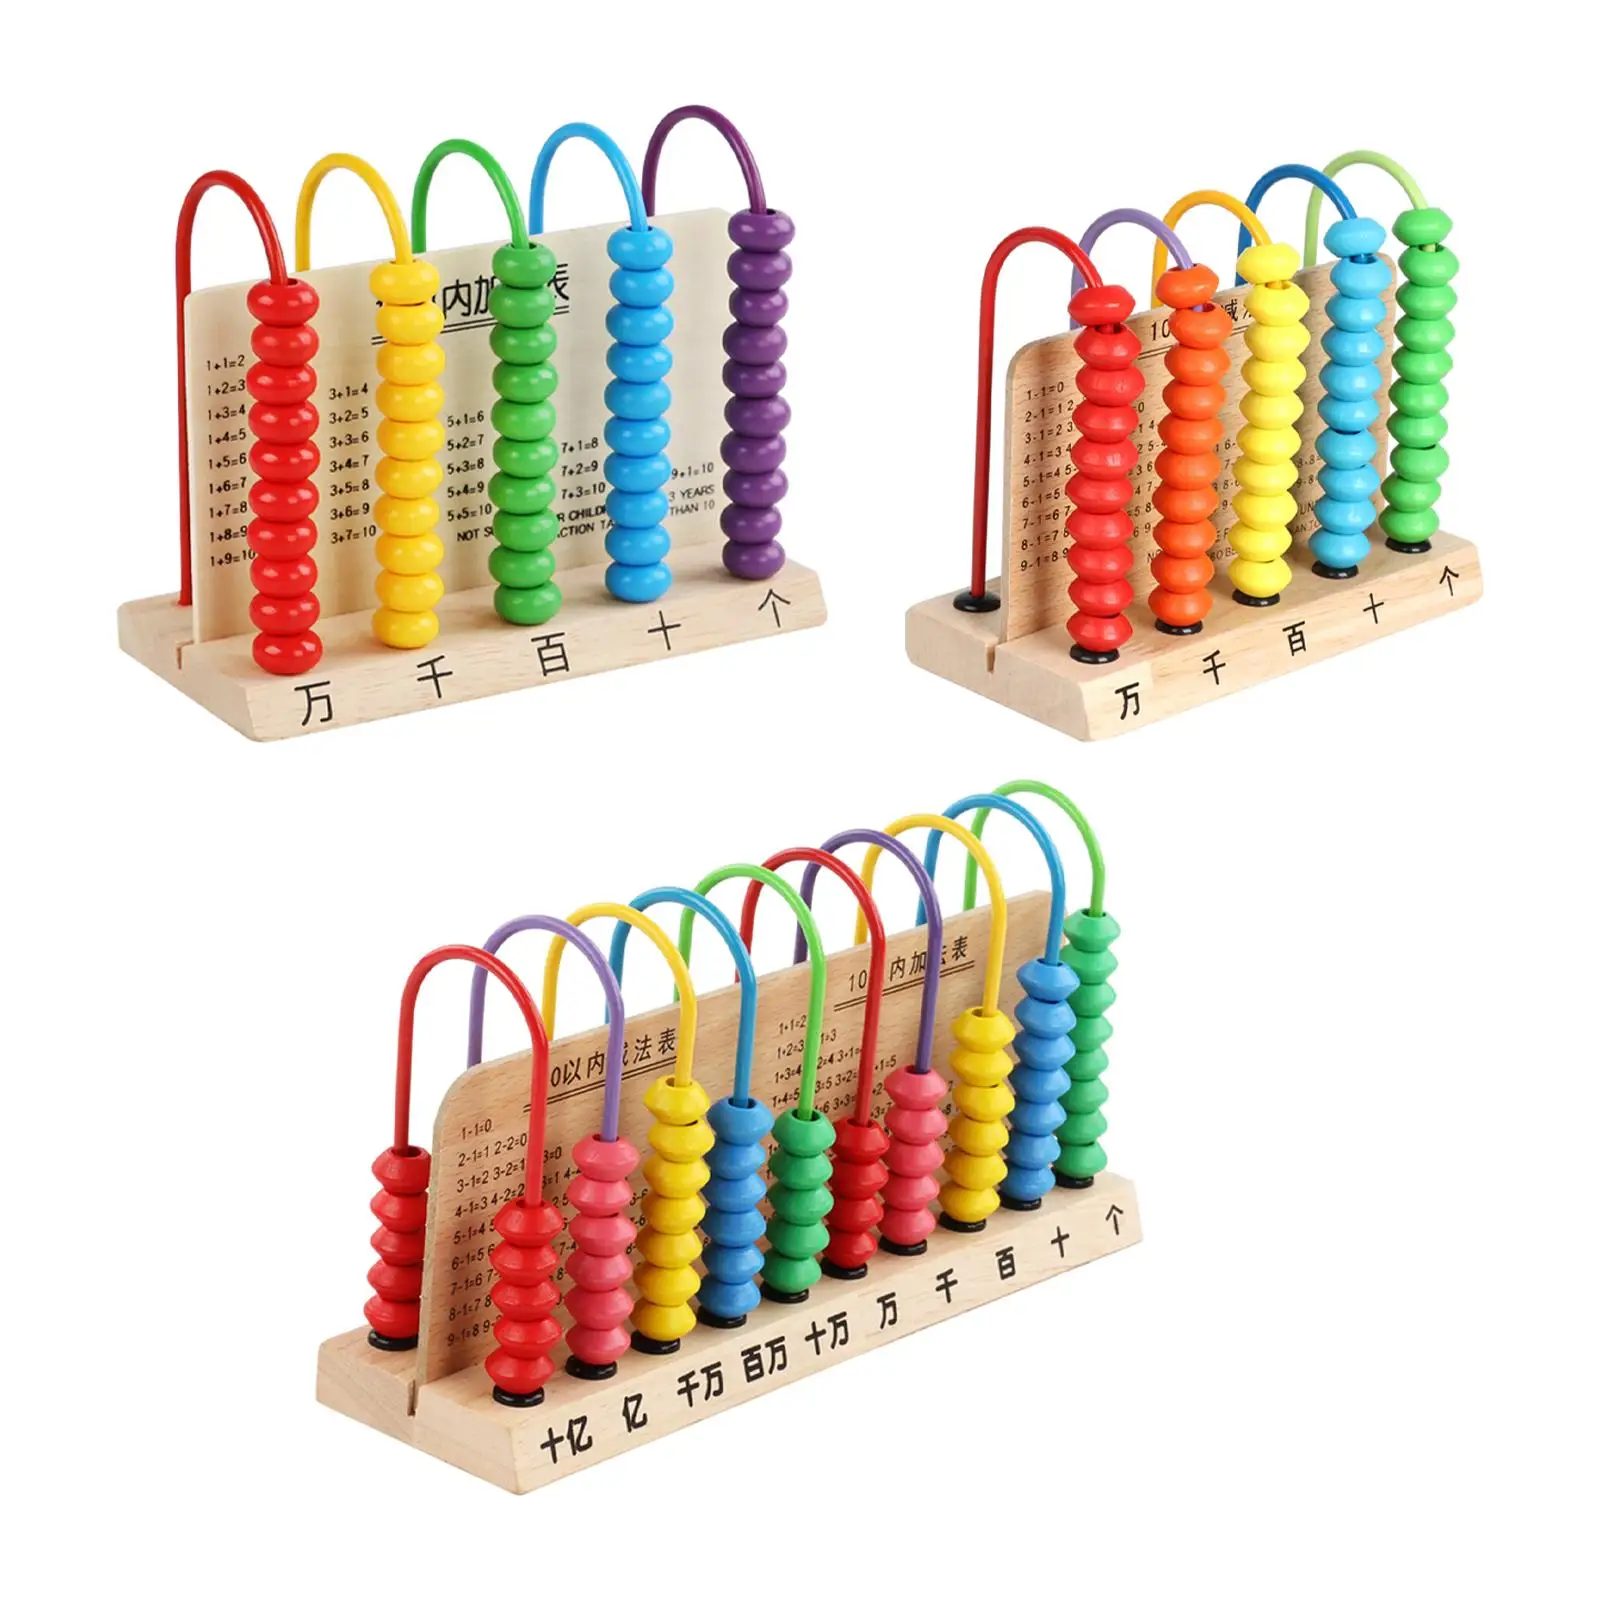 

Abacus Educational Toy Wooden Early Math Skills Colorful Beads Classic Wooden Counting Toy for Toddlers Kids Preschool Gift